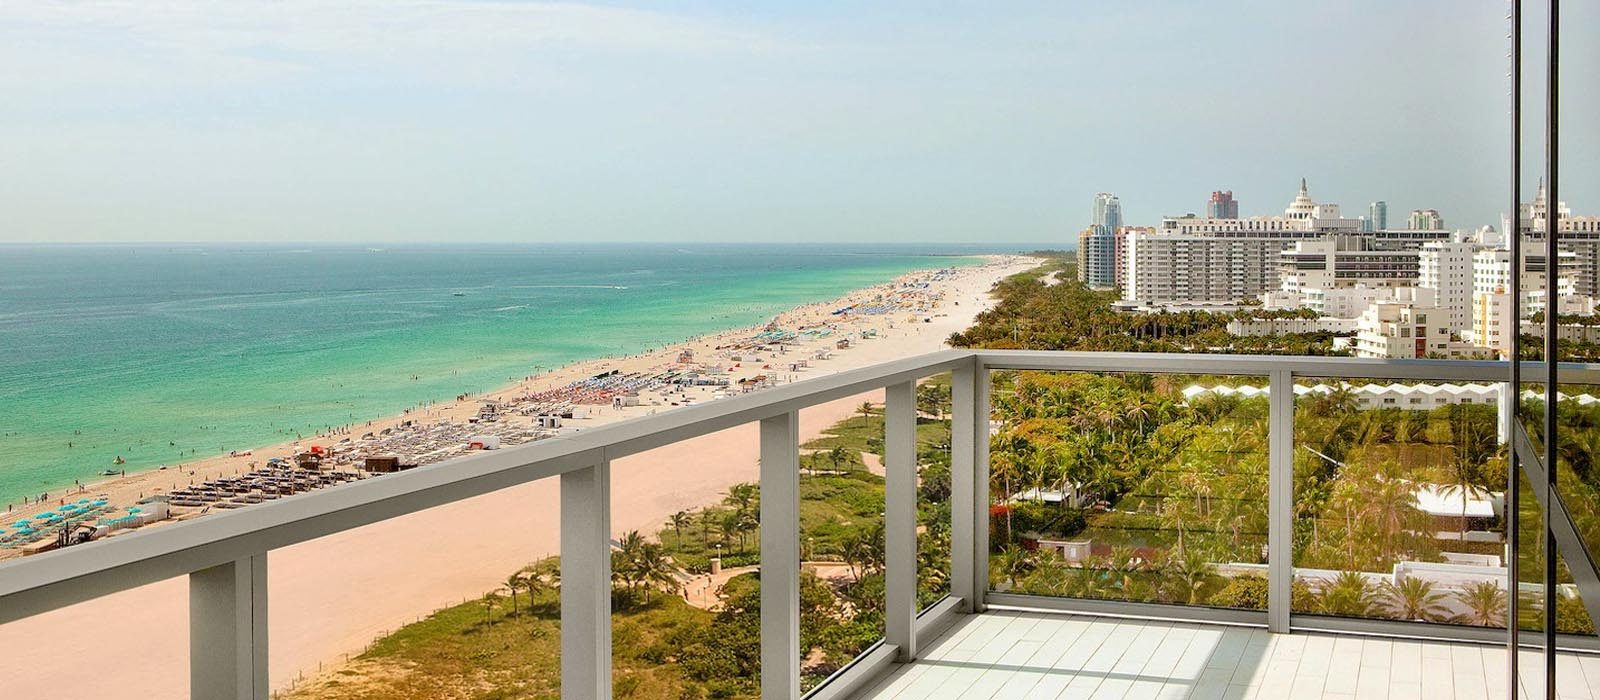 Luxury Miami Holiday Packages W South Beach Miami Header1